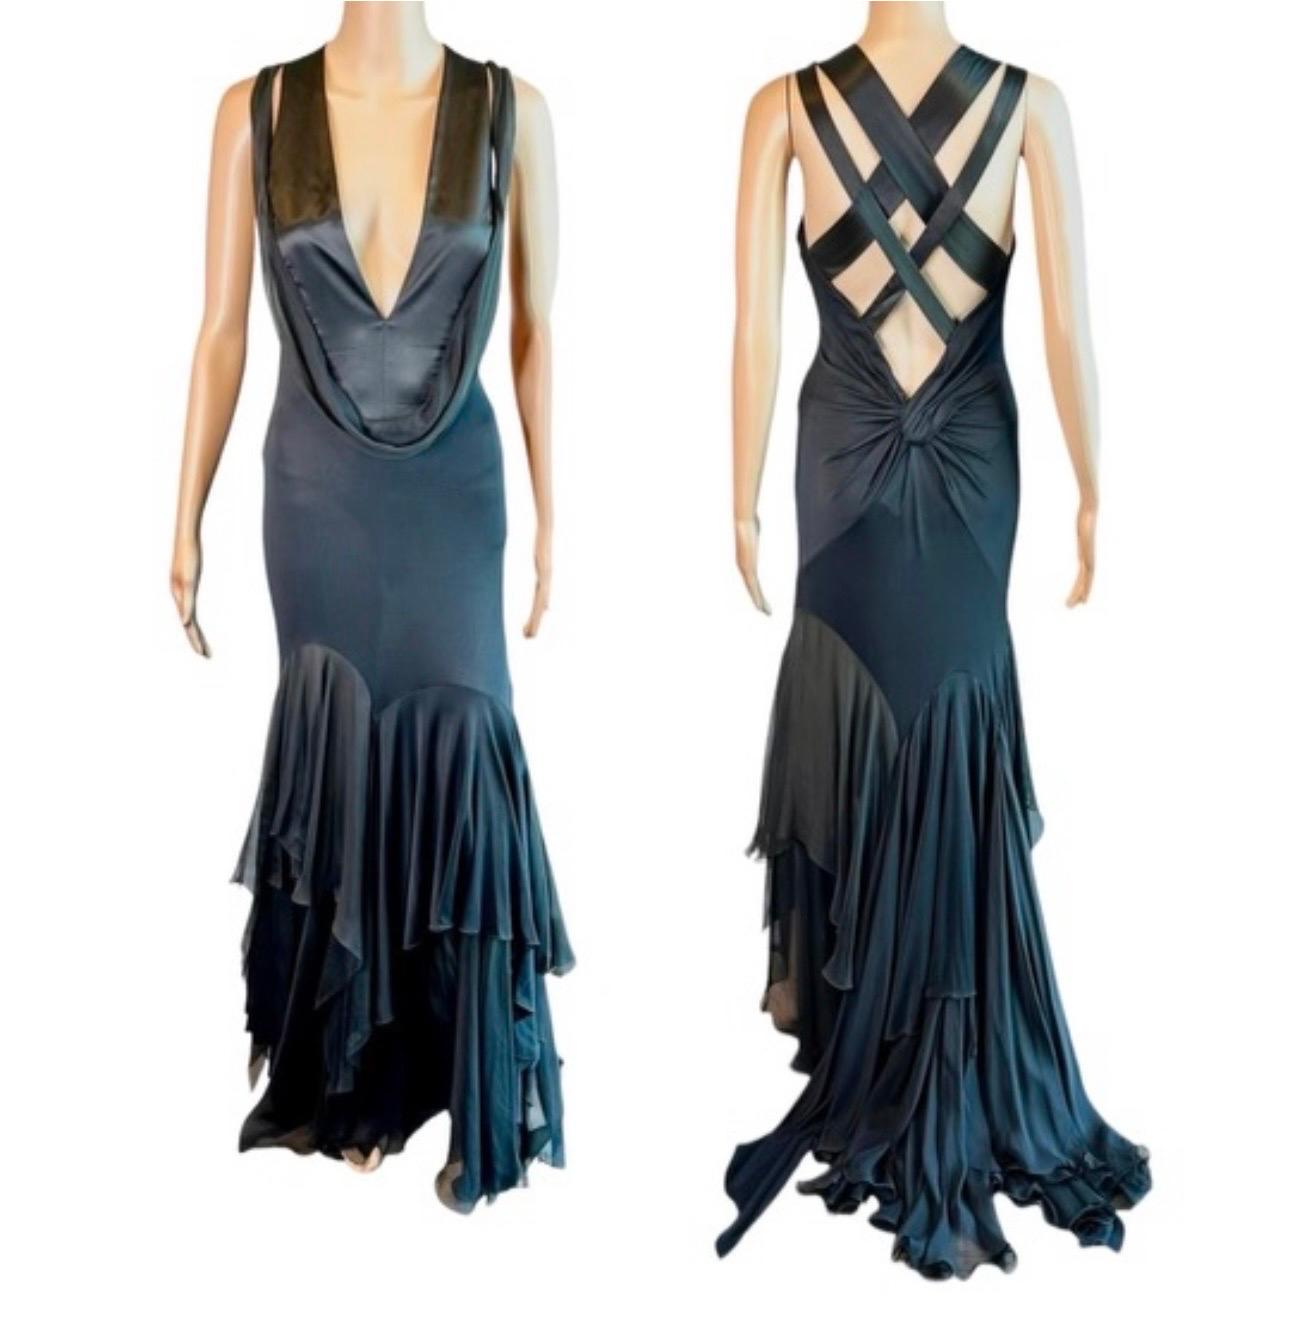 Women's Versace S/S 2004 Plunged Halter Open Back Ruffles Black Evening Dress Gown  For Sale